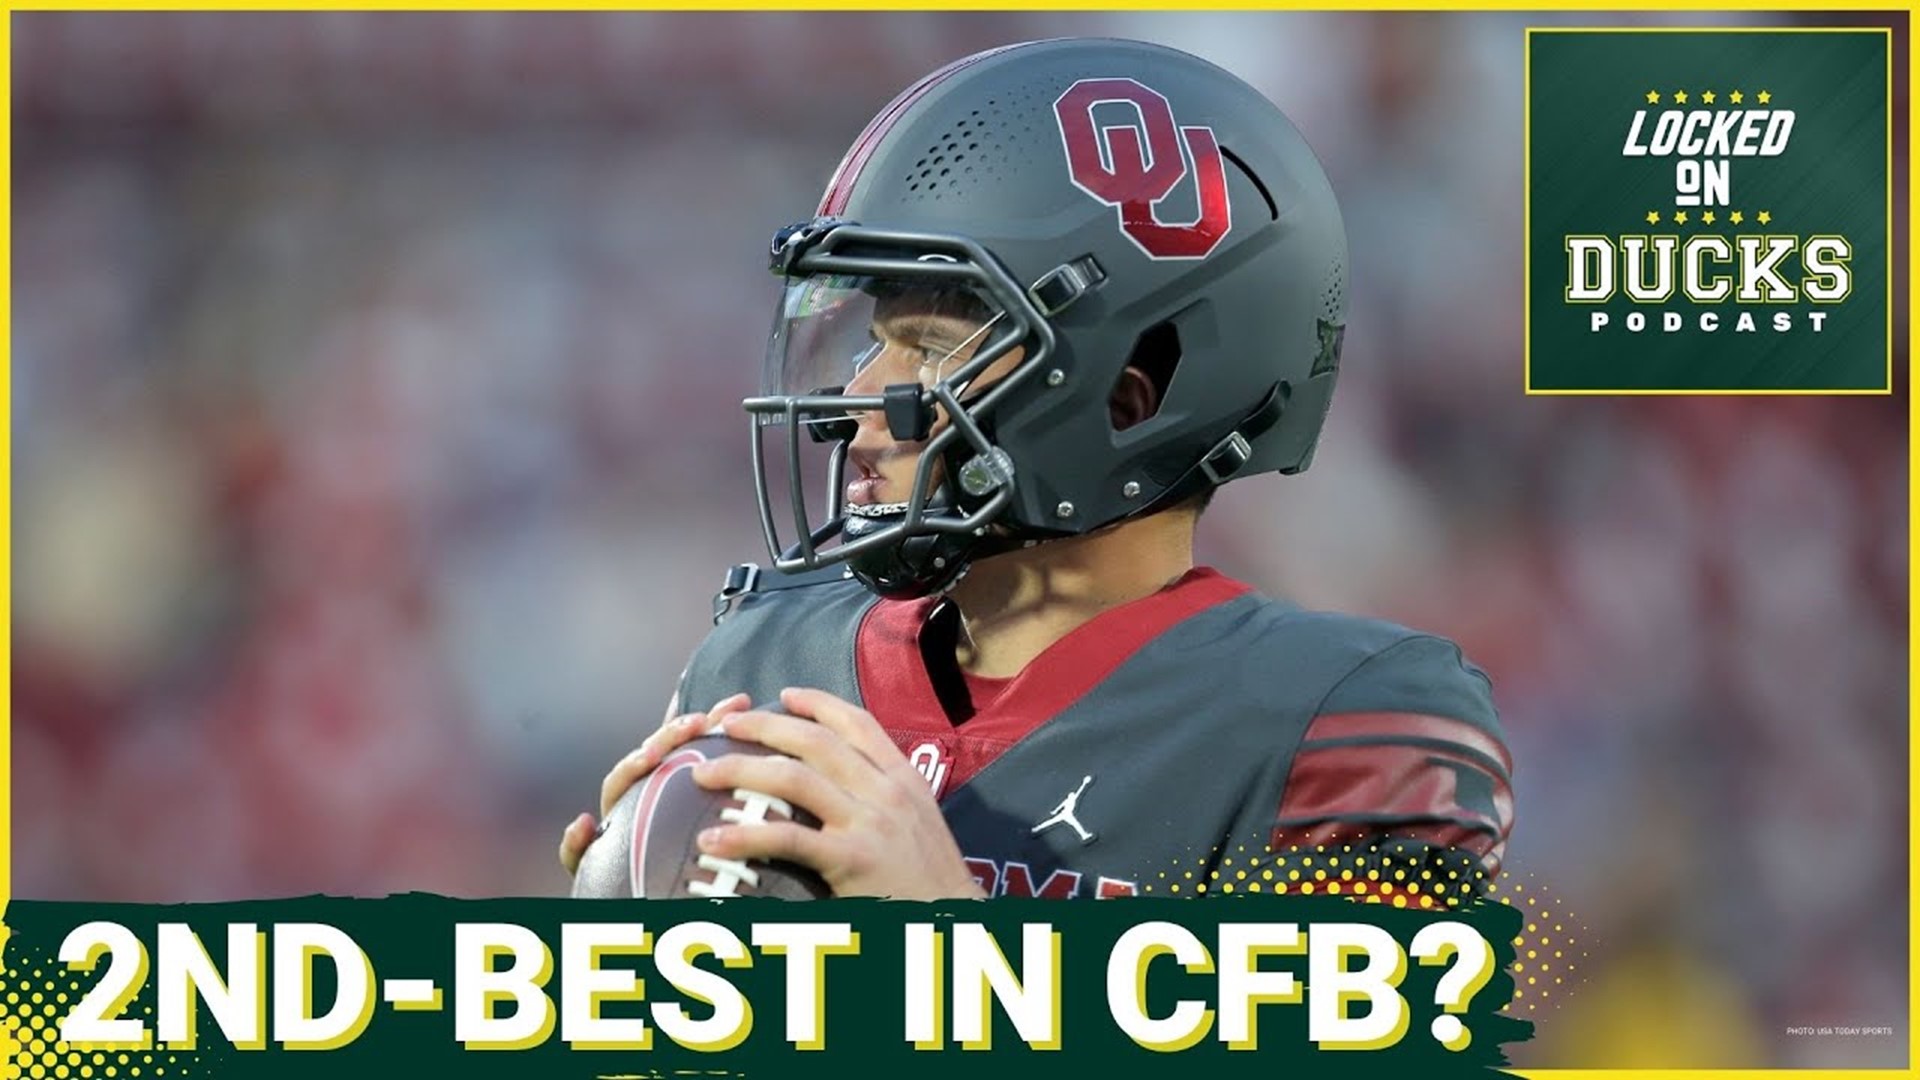 Oklahoma transfer QB Dillon Gabriel has one final season of college football to play, and he'll do so in a Ducks uniform with a great array of weapons around him.